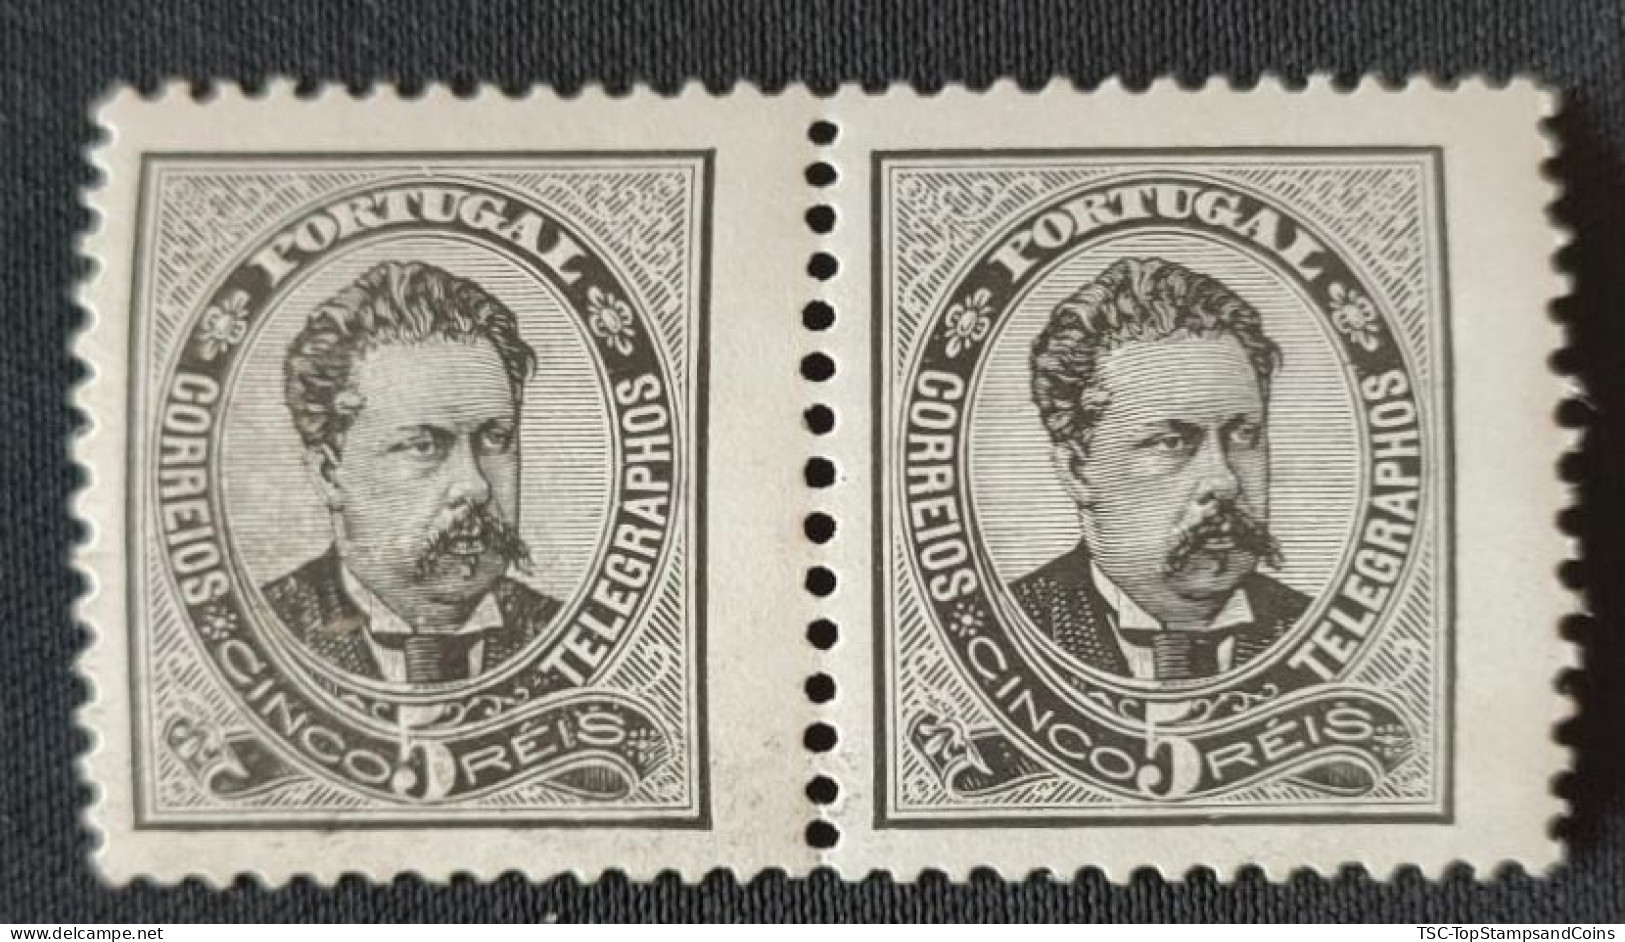 POR0060cMNHx2h3 - King D. Luís I Frontal View - New Values - Pair Of 5 Reis MNH Stamps - Portugal - 1887 - Nuevos